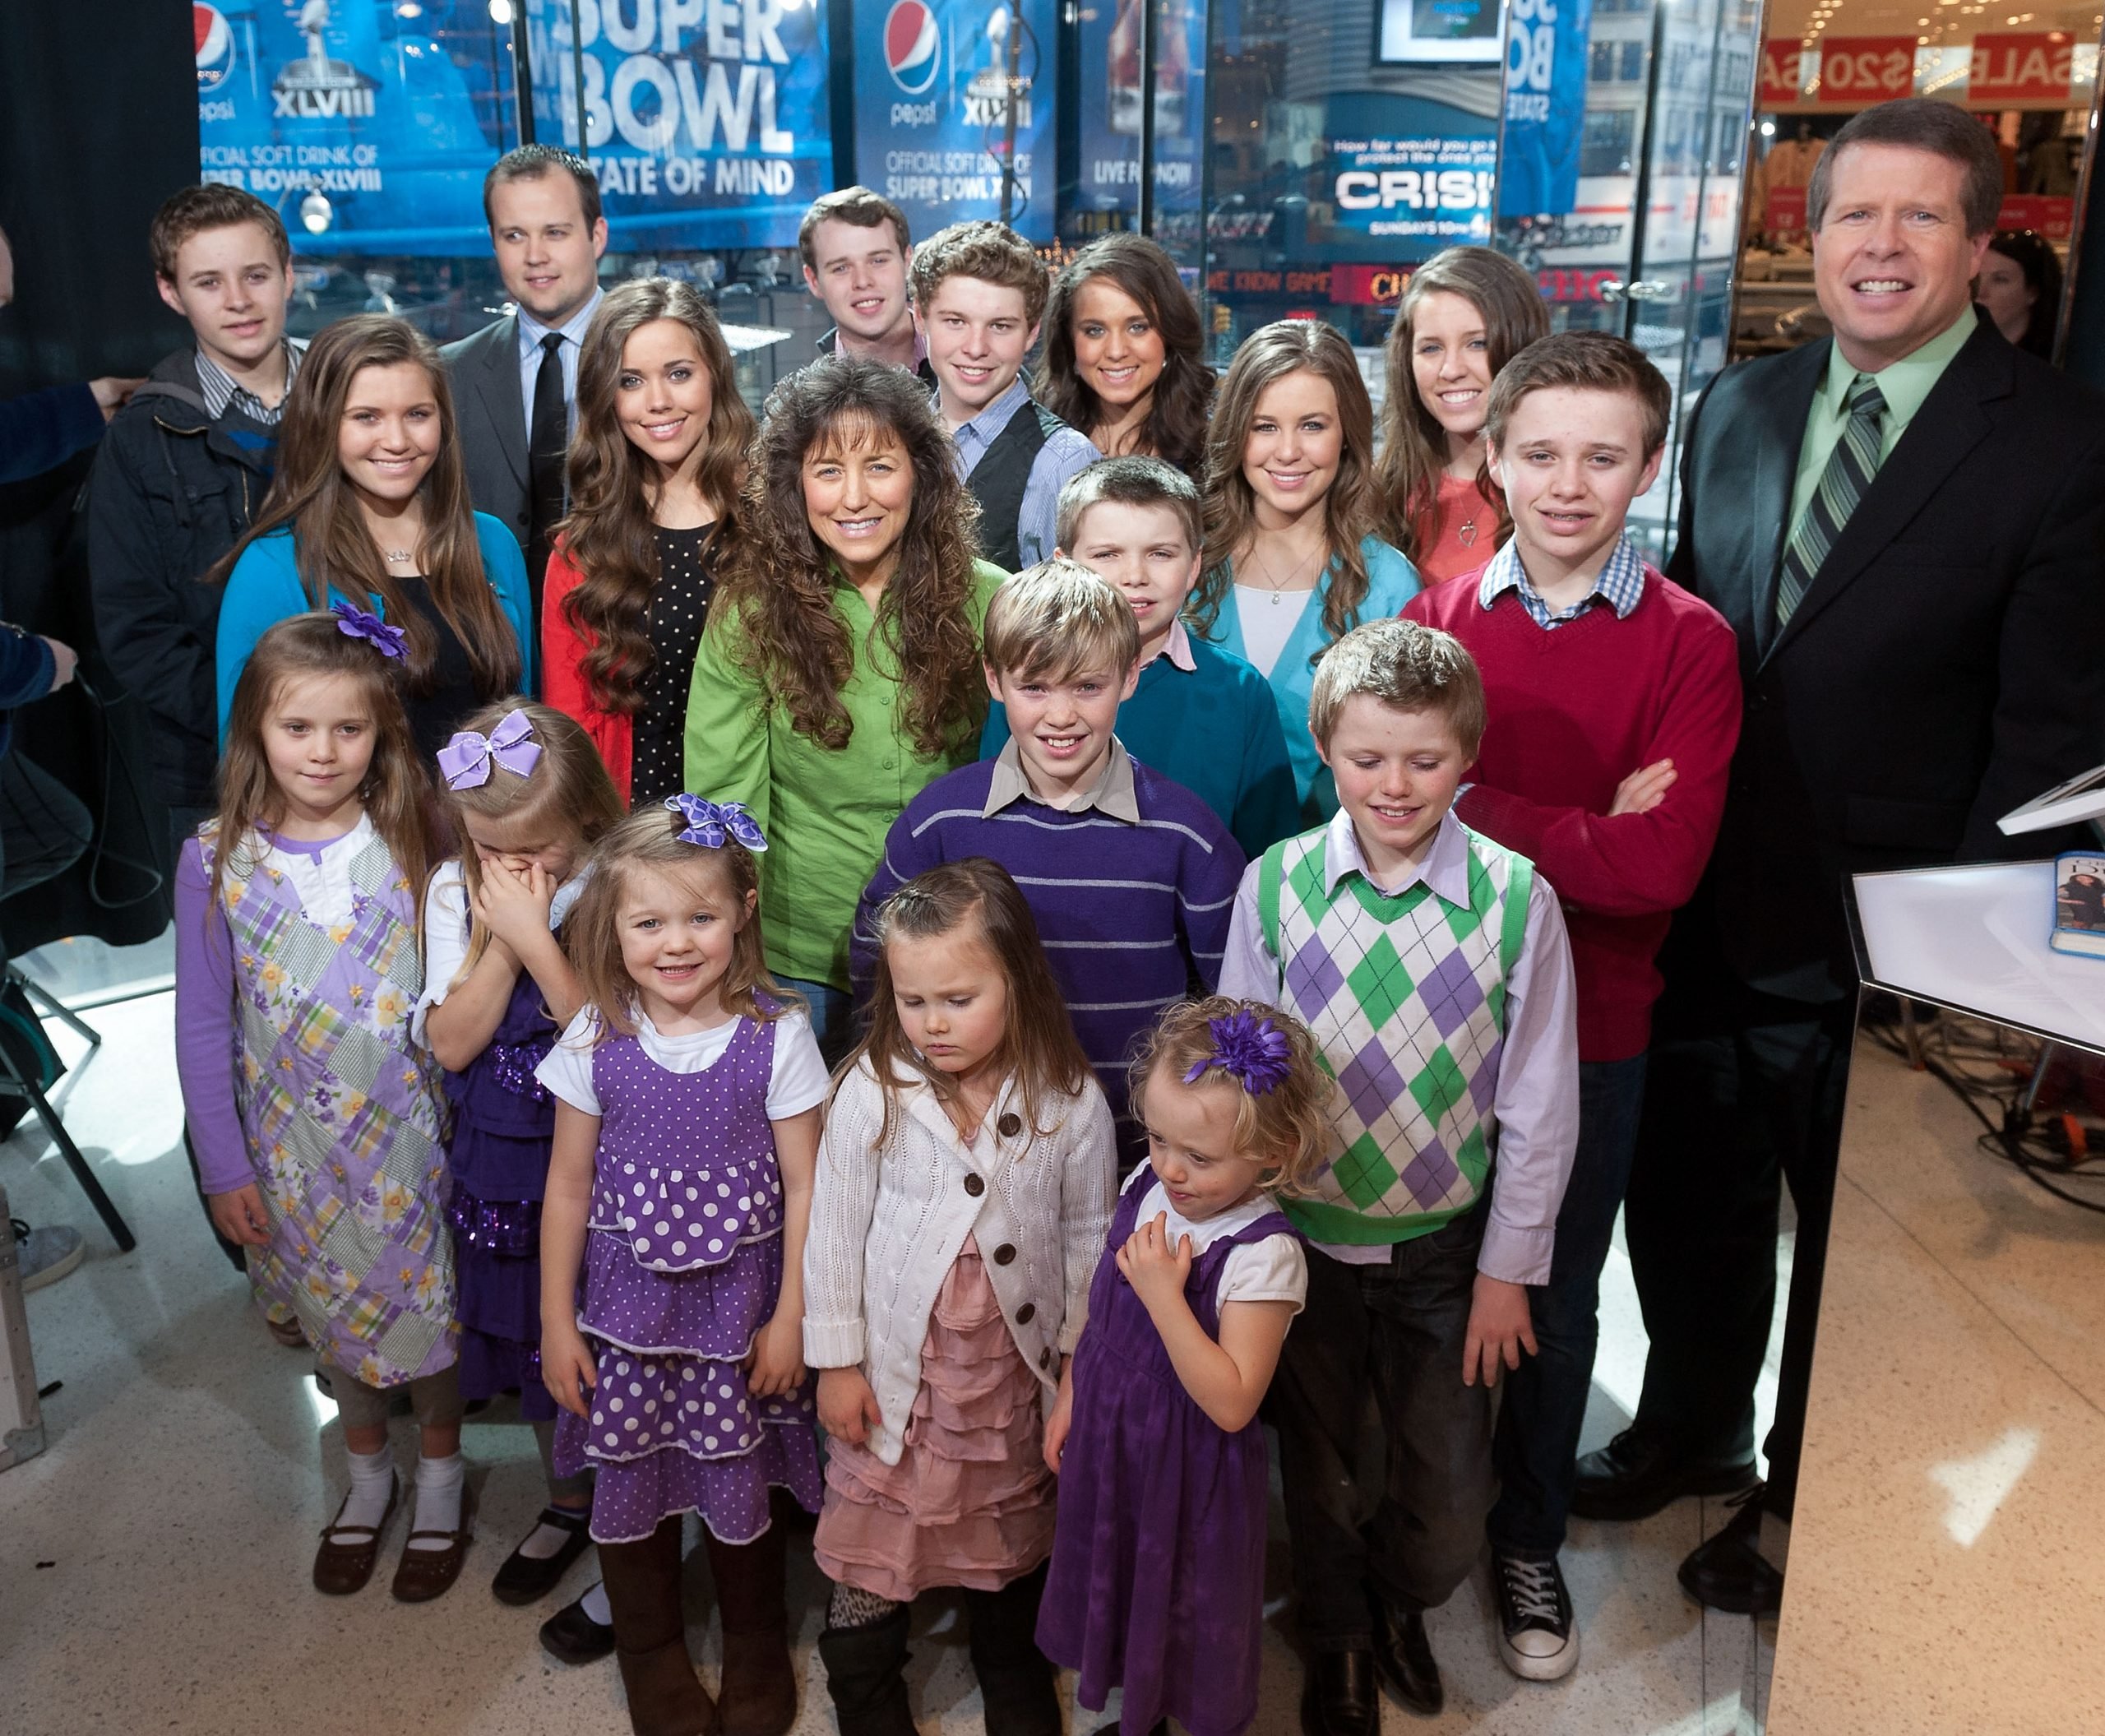 Group photo of the Duggar family on 'Extra' in 2014